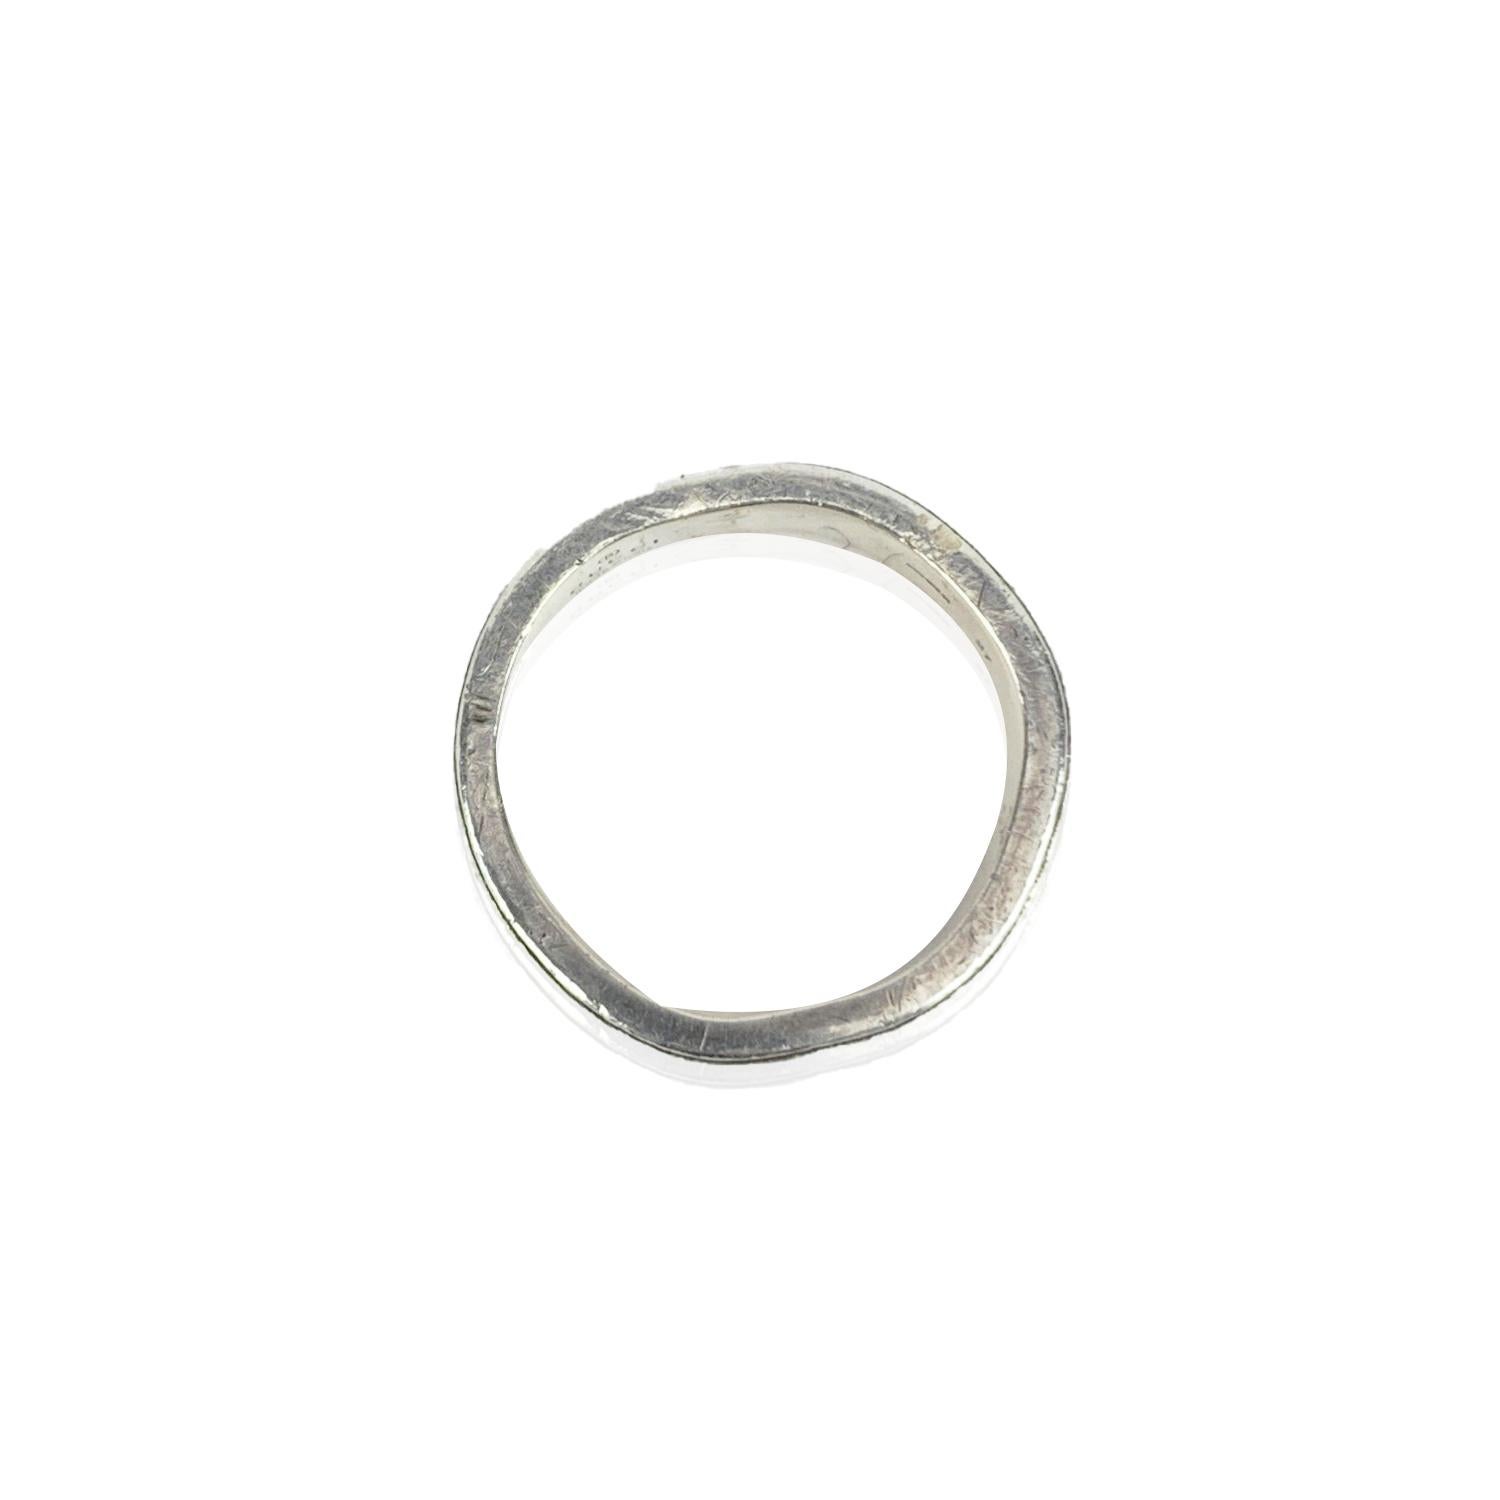 Gucci sterling silver 'Made in Italy by Gucci' band ring . GG - Gucci logo. 'Ar 925' hallmark engraved internally. 'Gucci - Made in italy' engraved internally. Size: 27 (it should correspond to a size 11.5 US). Max width:7 mm.


Condition

A -